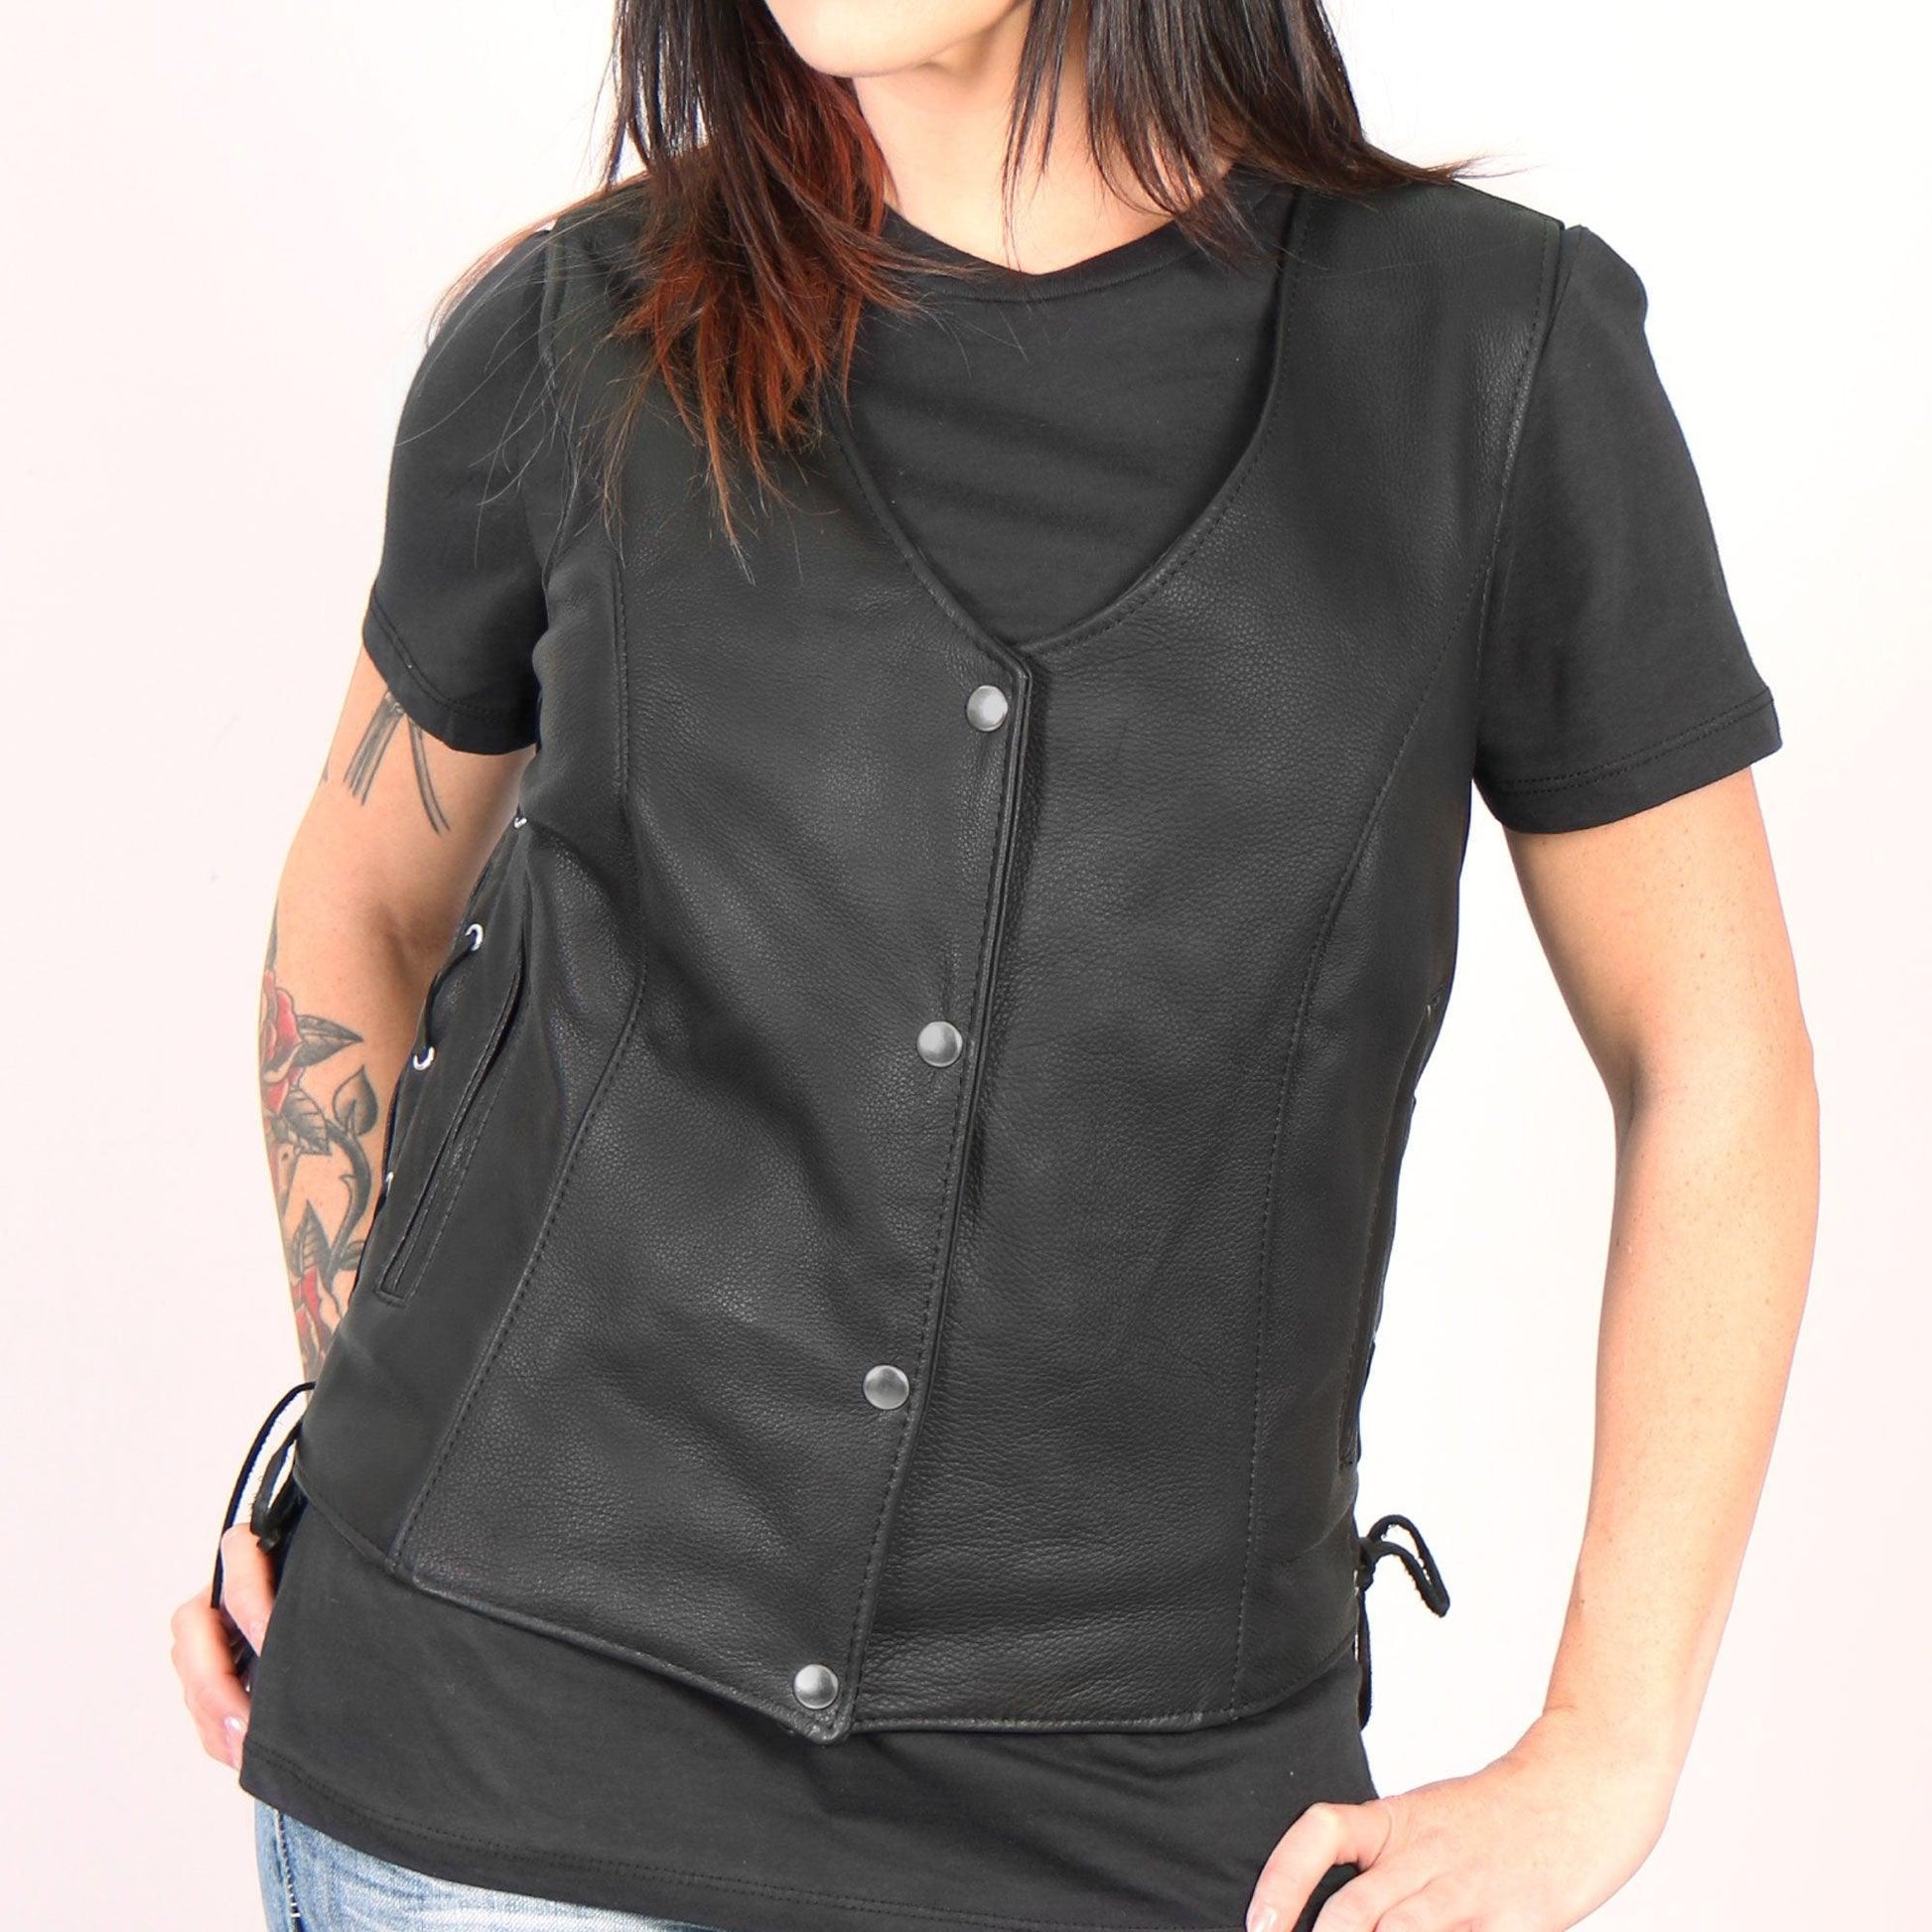 USA Made Side Lace Hot Leathers Biker Vest - Military Republic